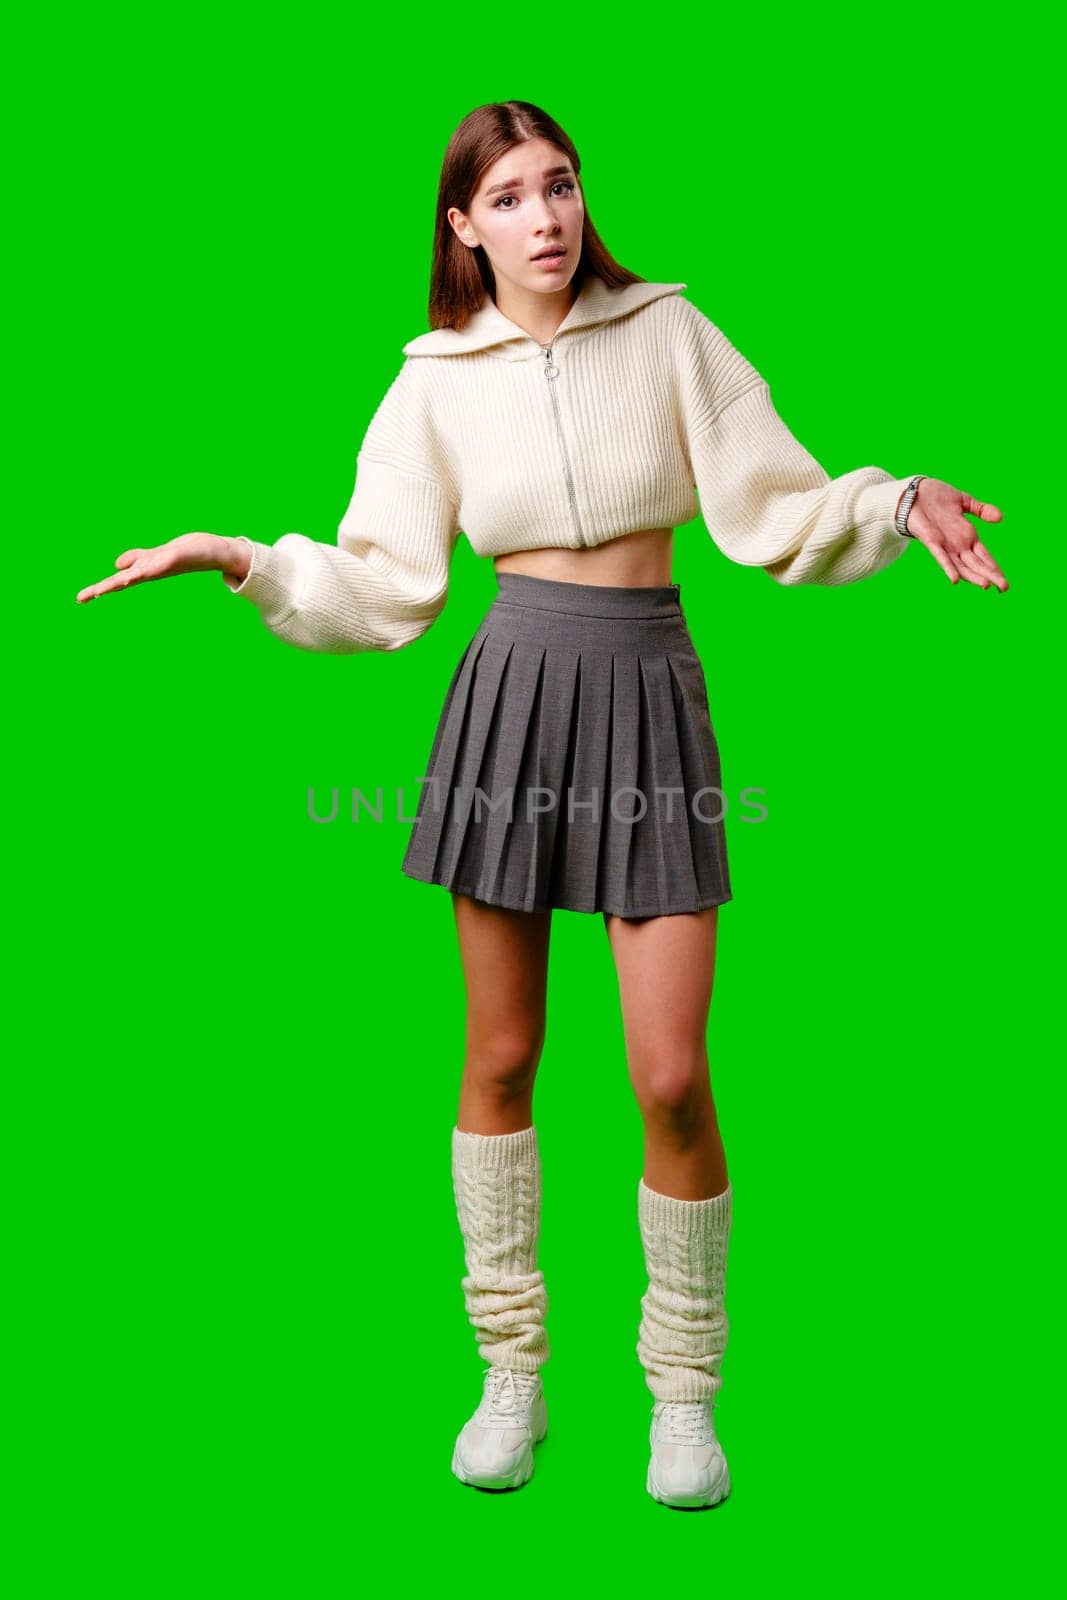 A woman is standing on a green screen backdrop, wearing a skirt and sweater. She appears poised and looking directly at the camera. by Fabrikasimf